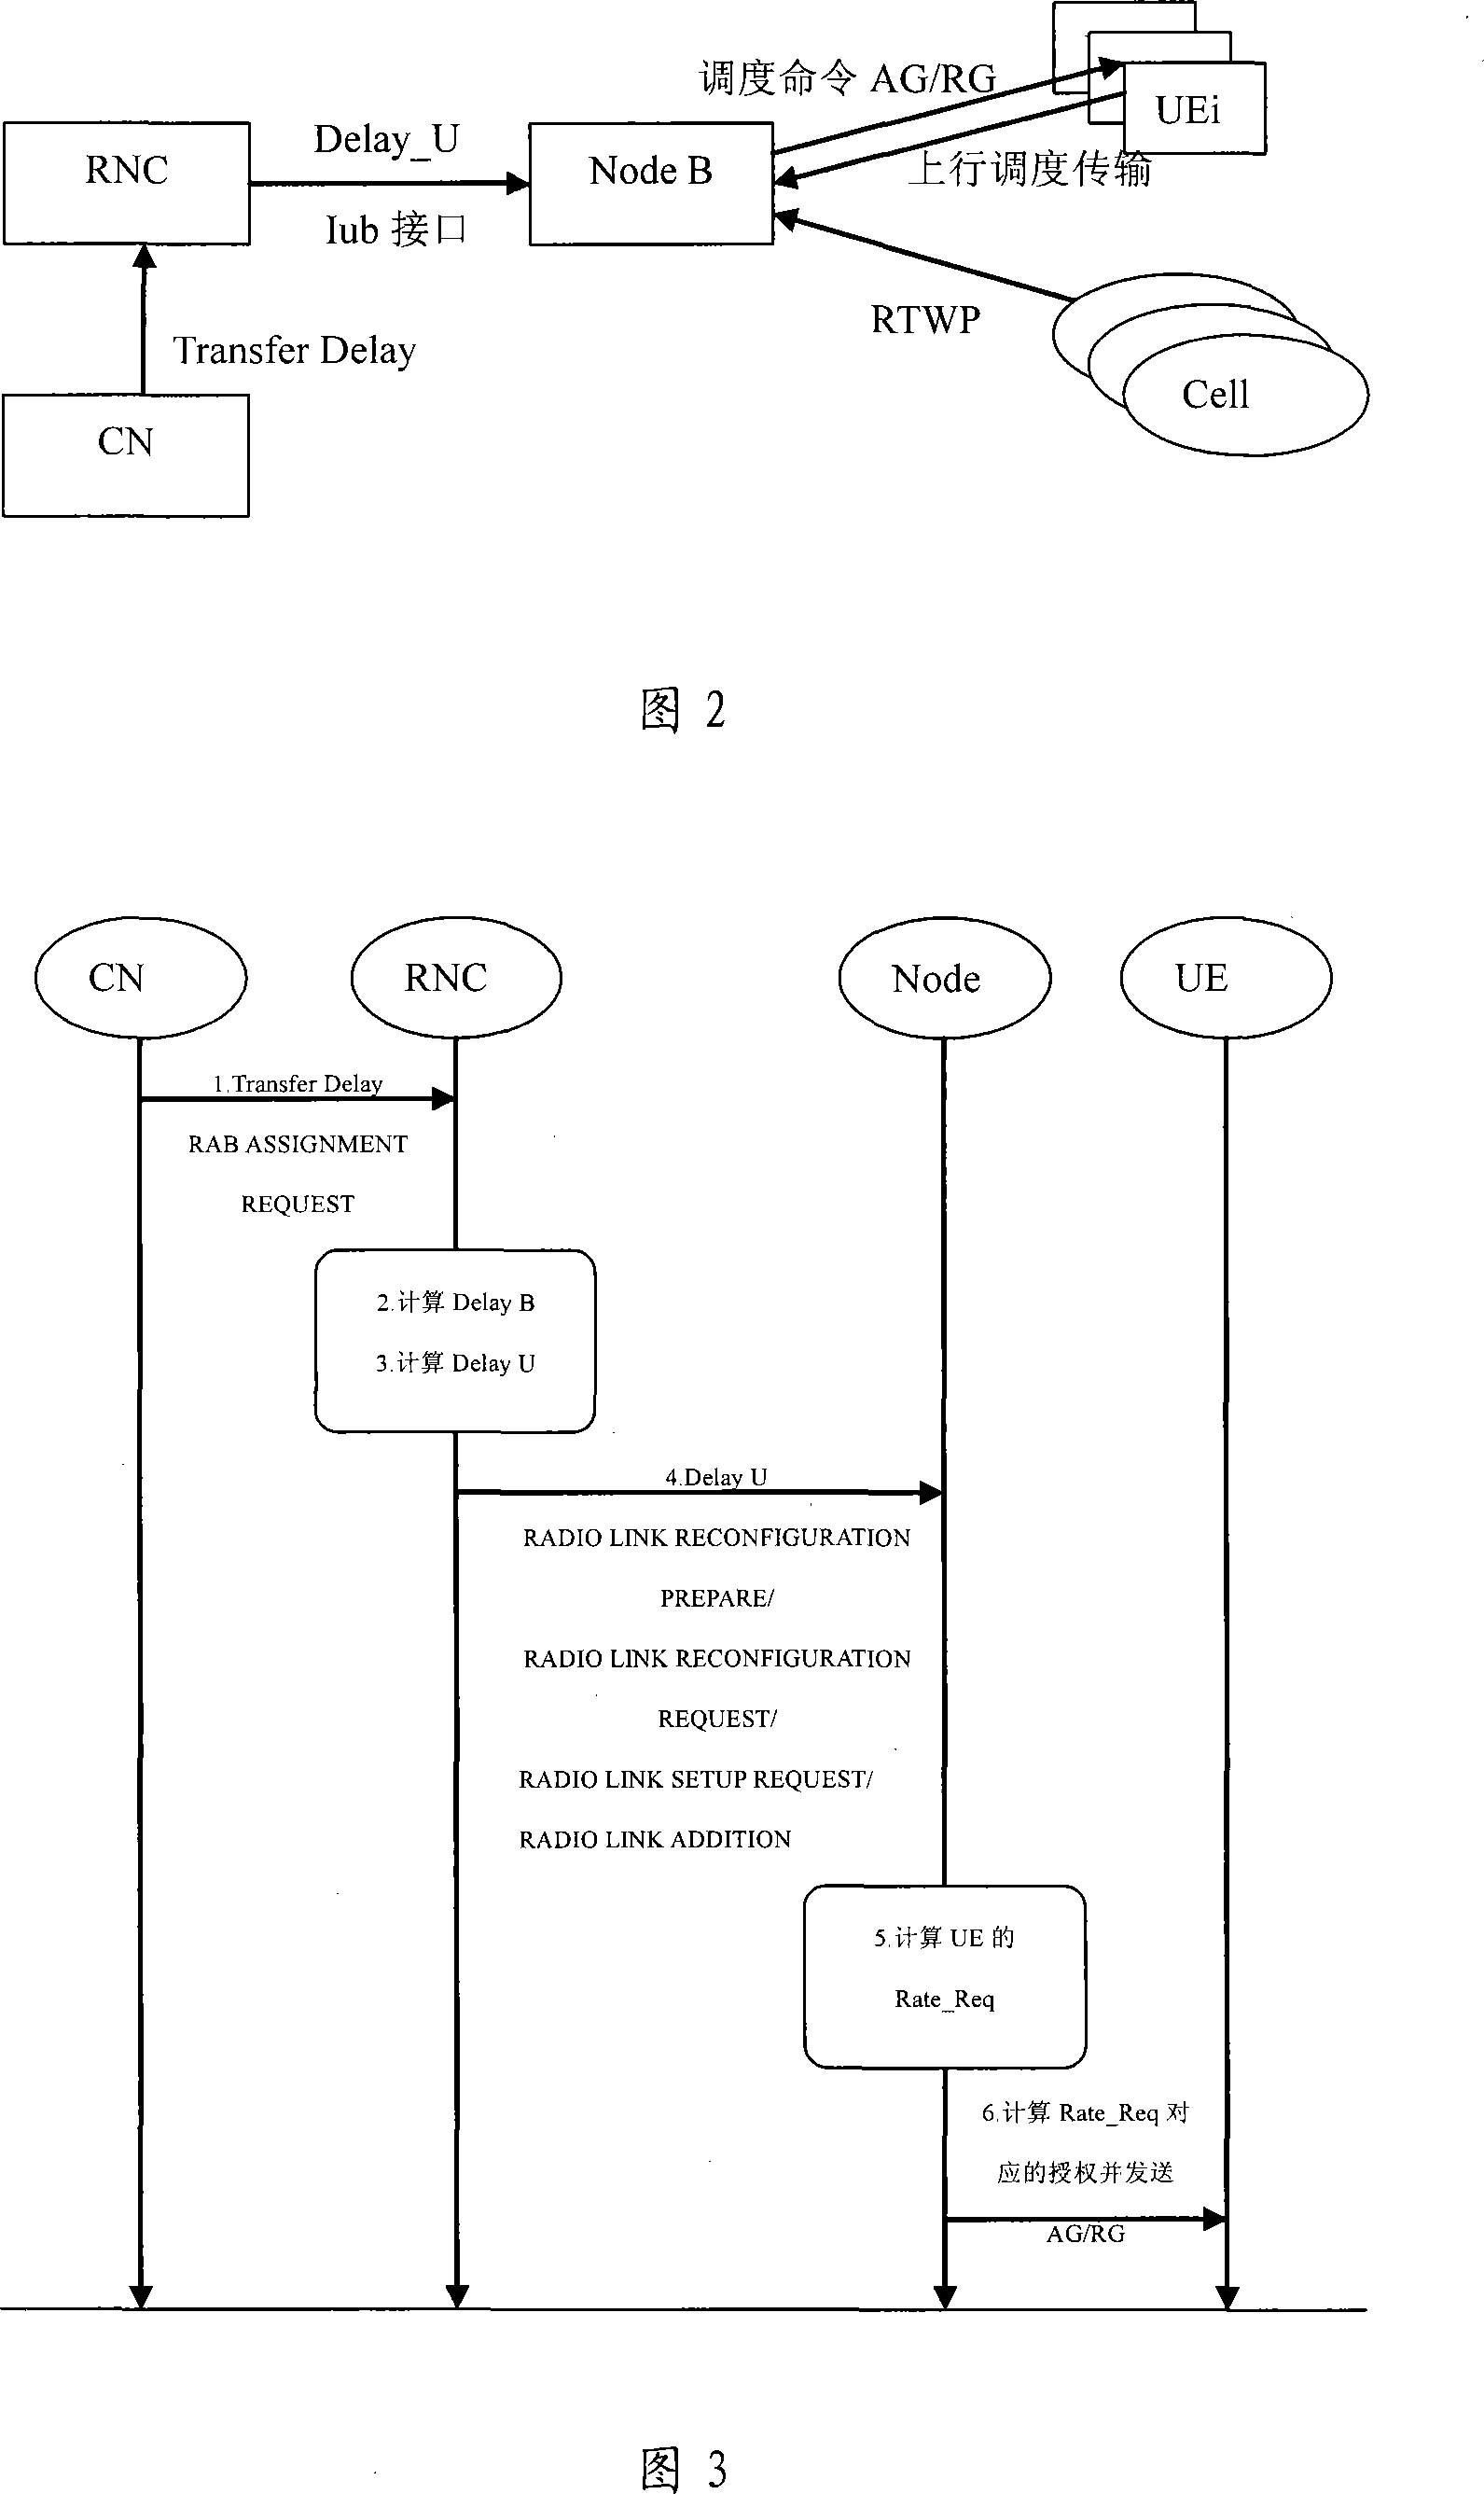 Method for enhancing wireless communication up-link service quality